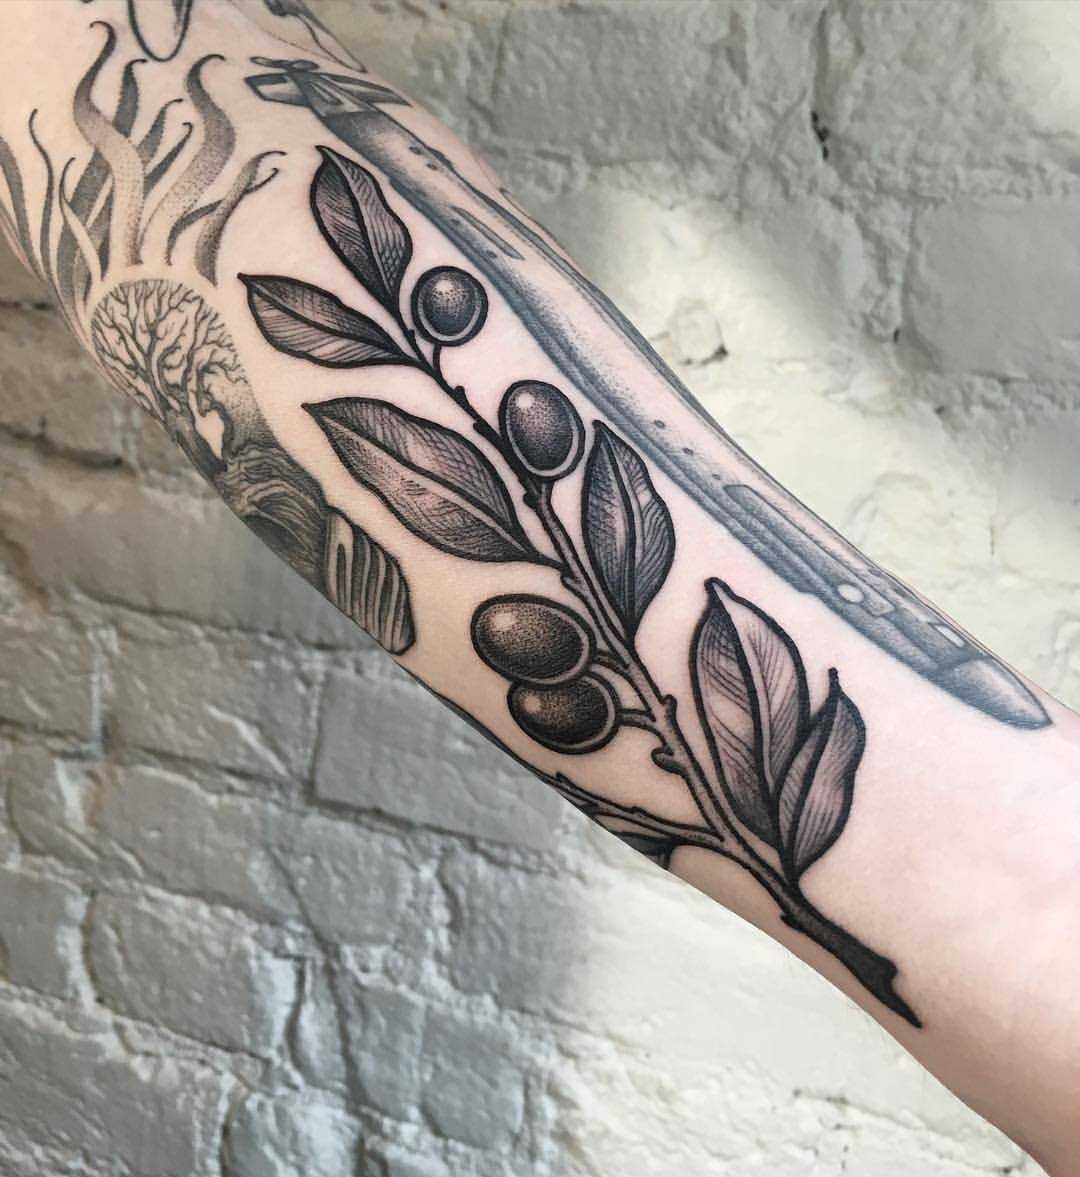 Olive branch by Sasha Tattooing